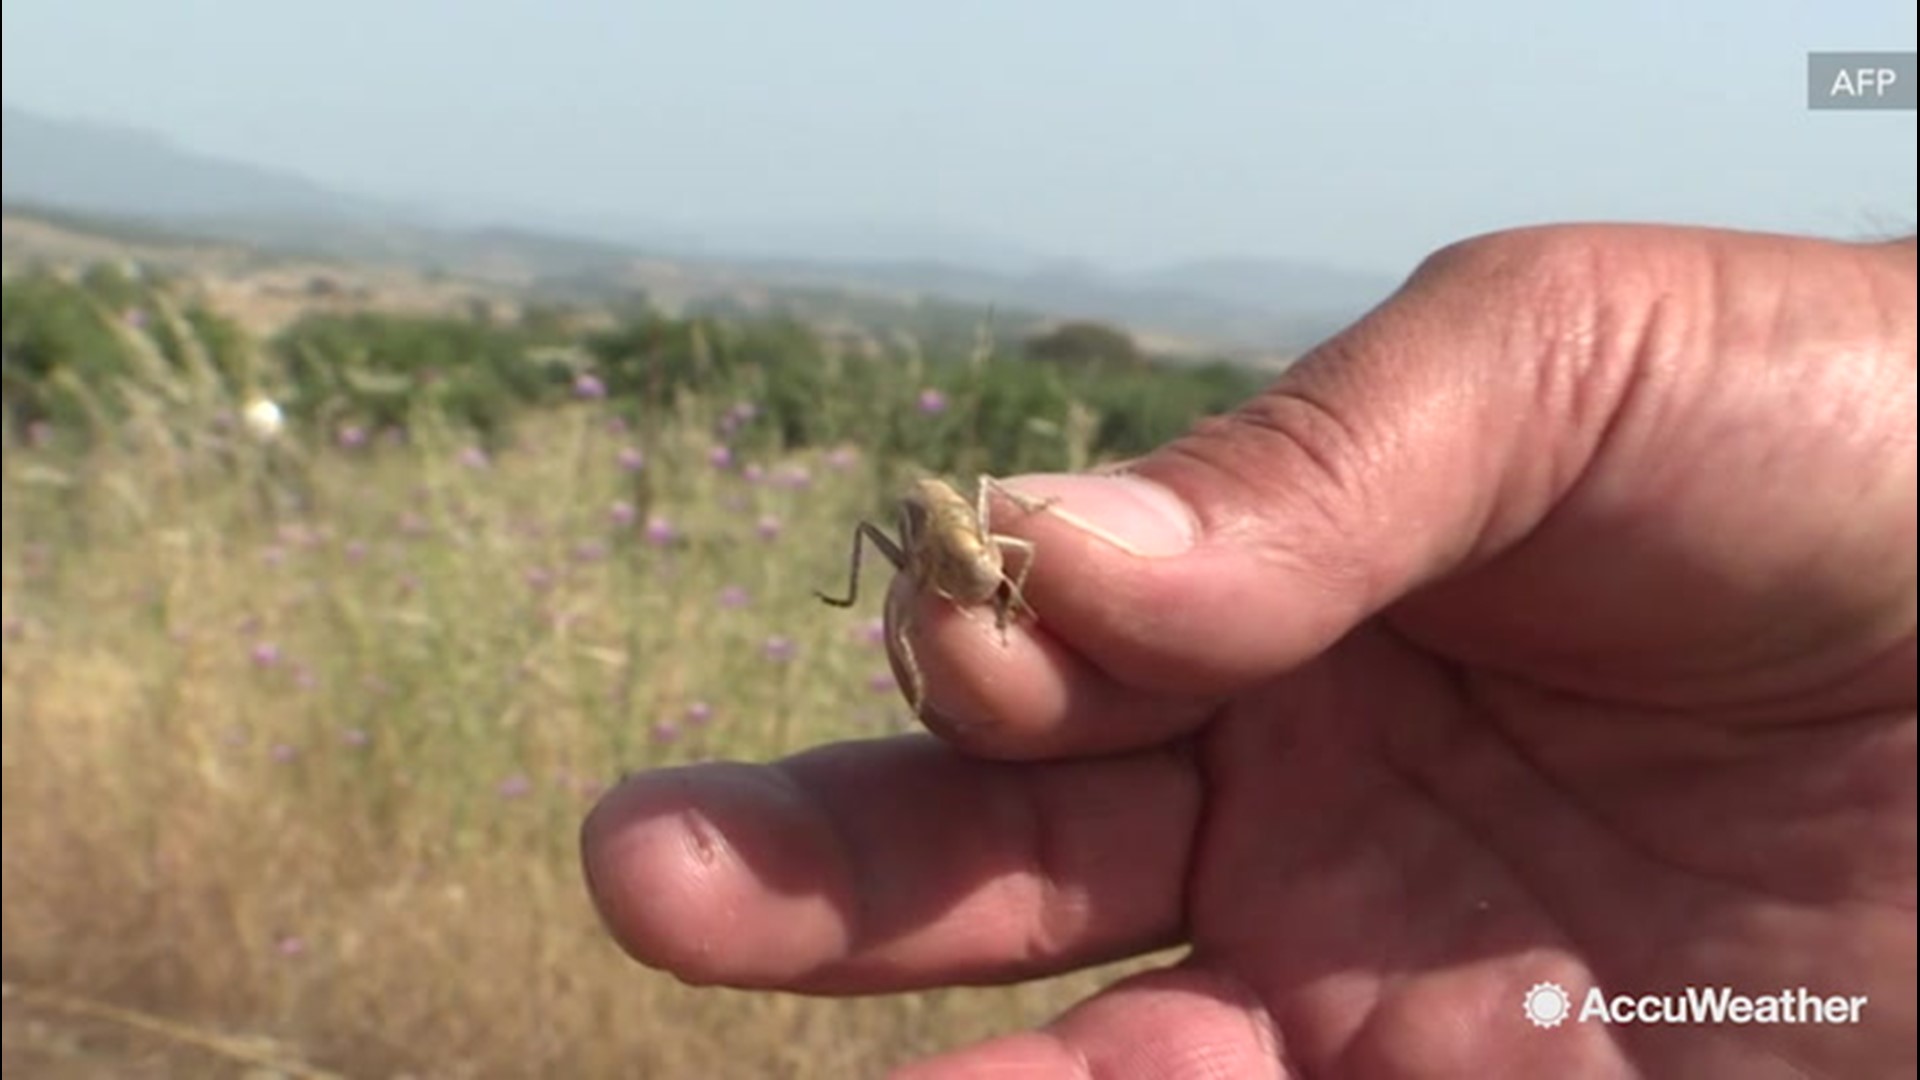 Farmers in Sardinia, Italy, have inspected their crops and estimate that a swarm of locust have destroyed at nearly 5,000 acres.